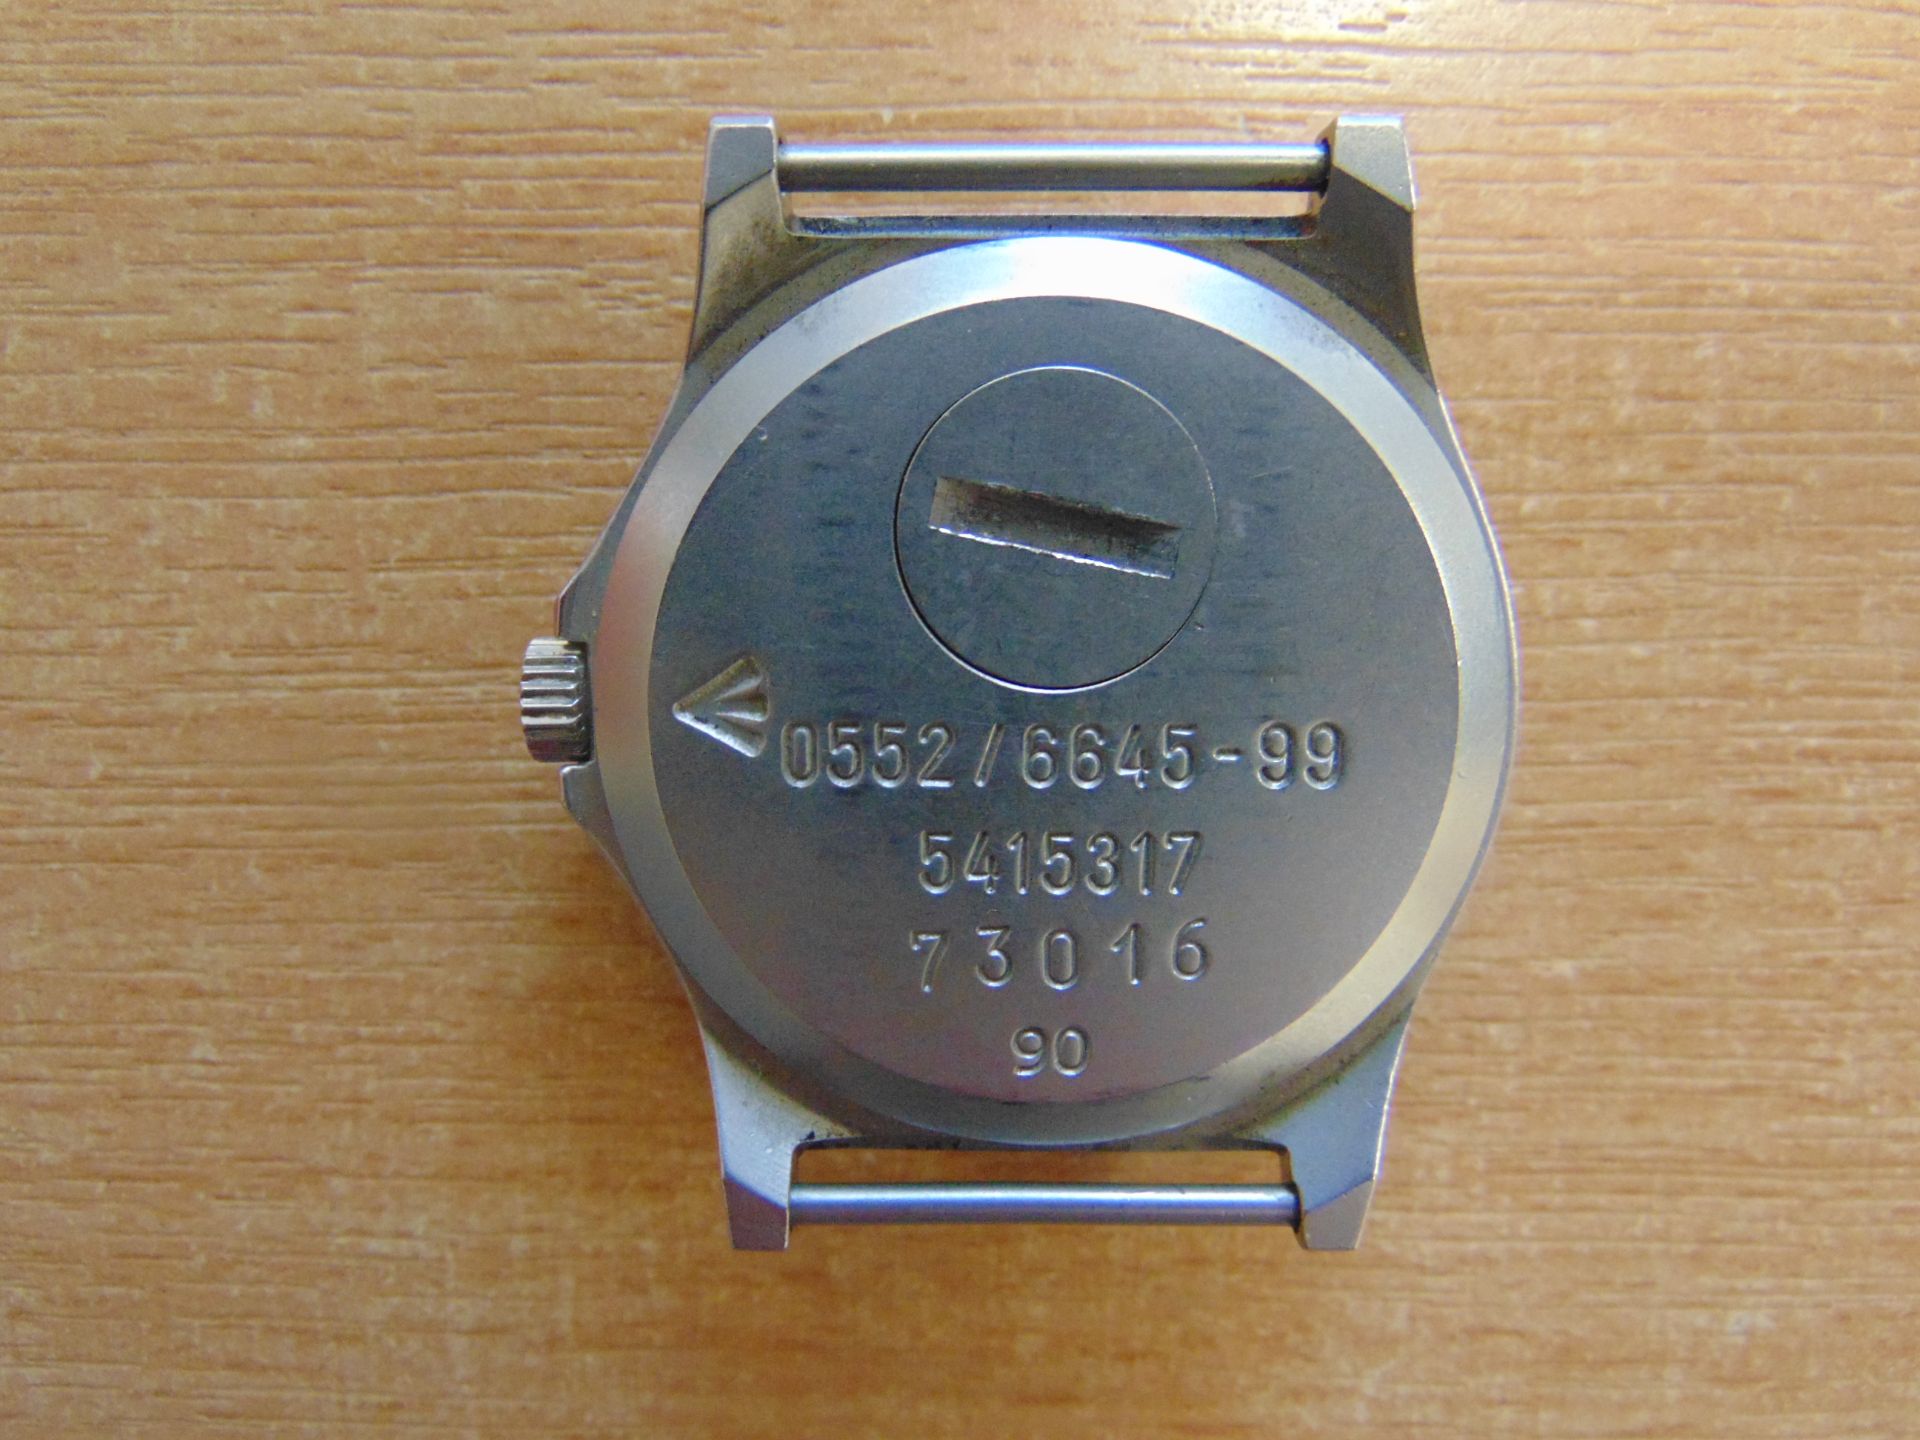 VERY RARE C.W.C 0552 RM/NAVY ISSUE SERVICE WATCH DATED 1990- GULF WAR - Image 5 of 7